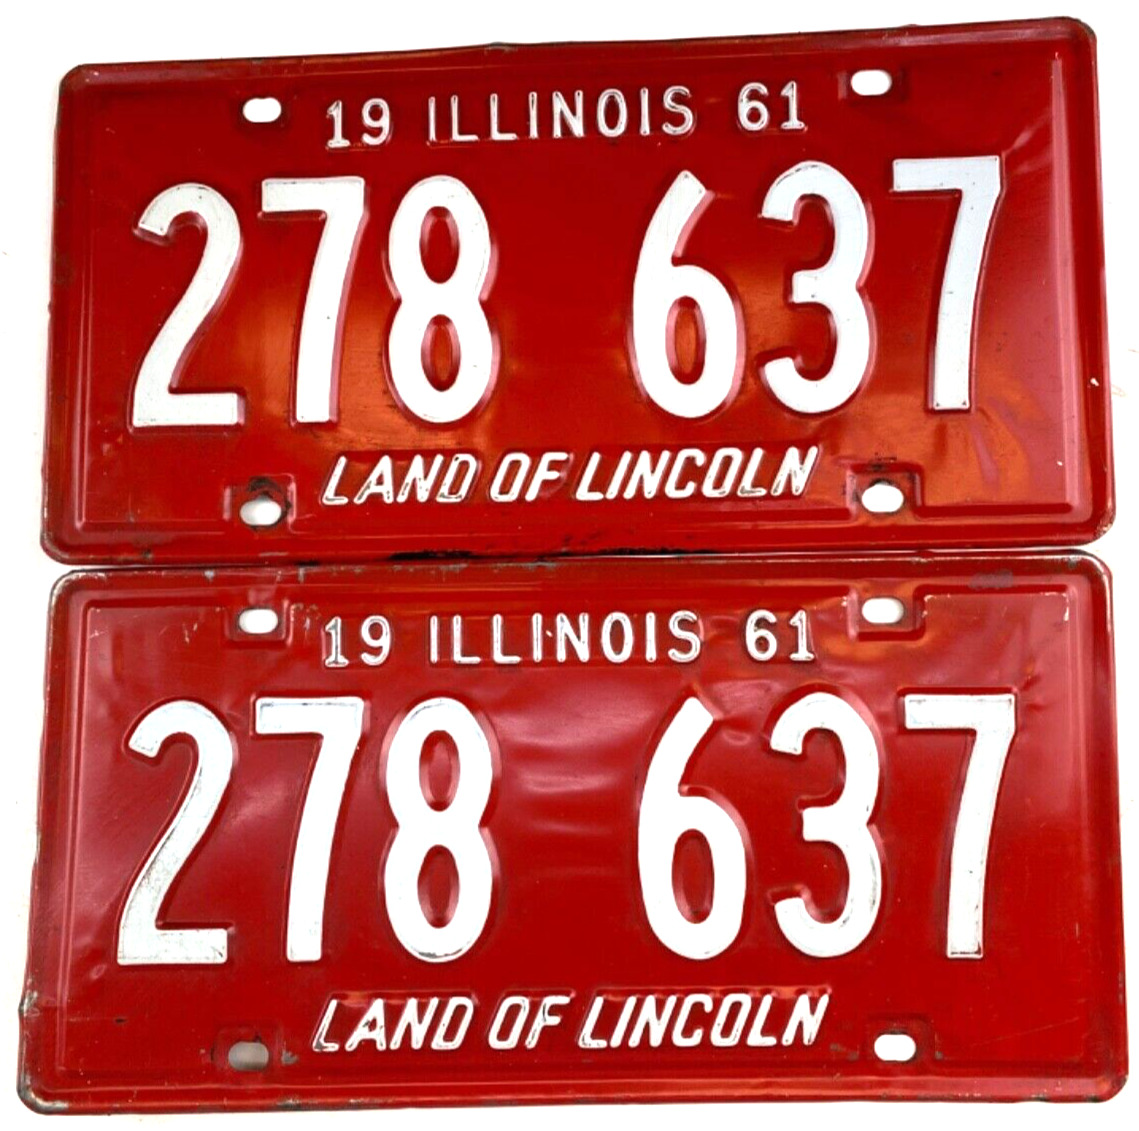 Vintage Illinois 1961 License Plate Set 278 637 Man Cave Wall Decor Collector